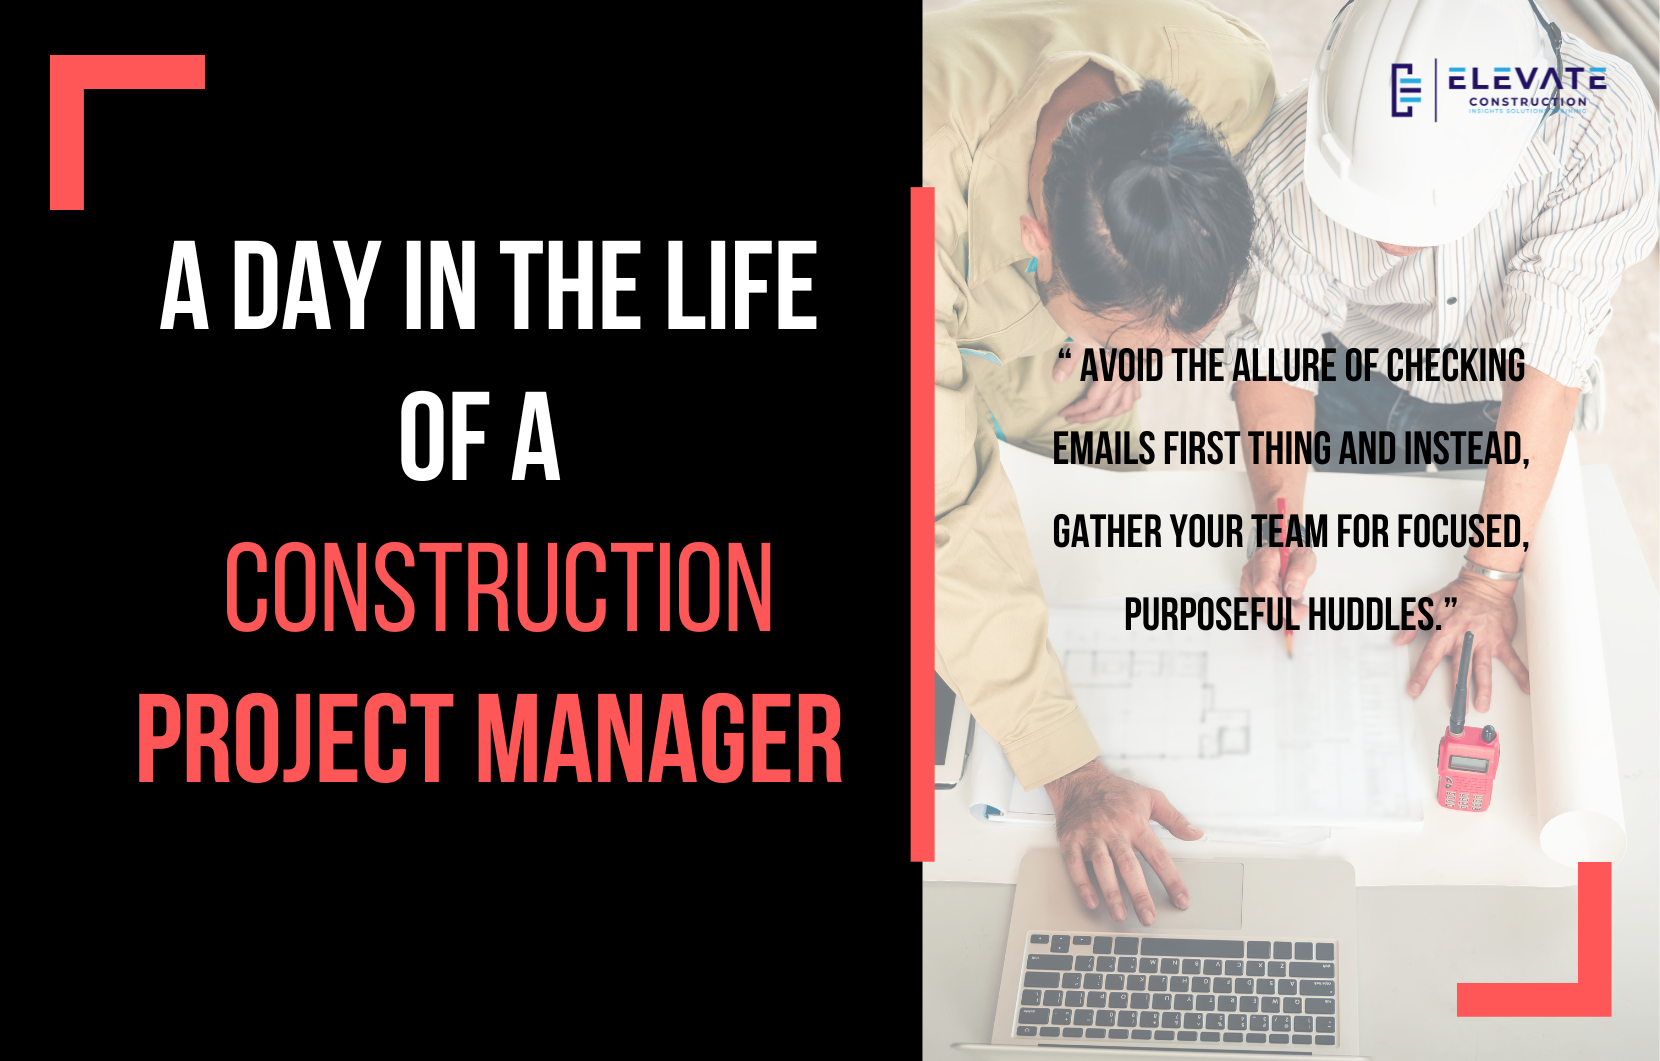 A Day in the Life of a Construction Project Manager